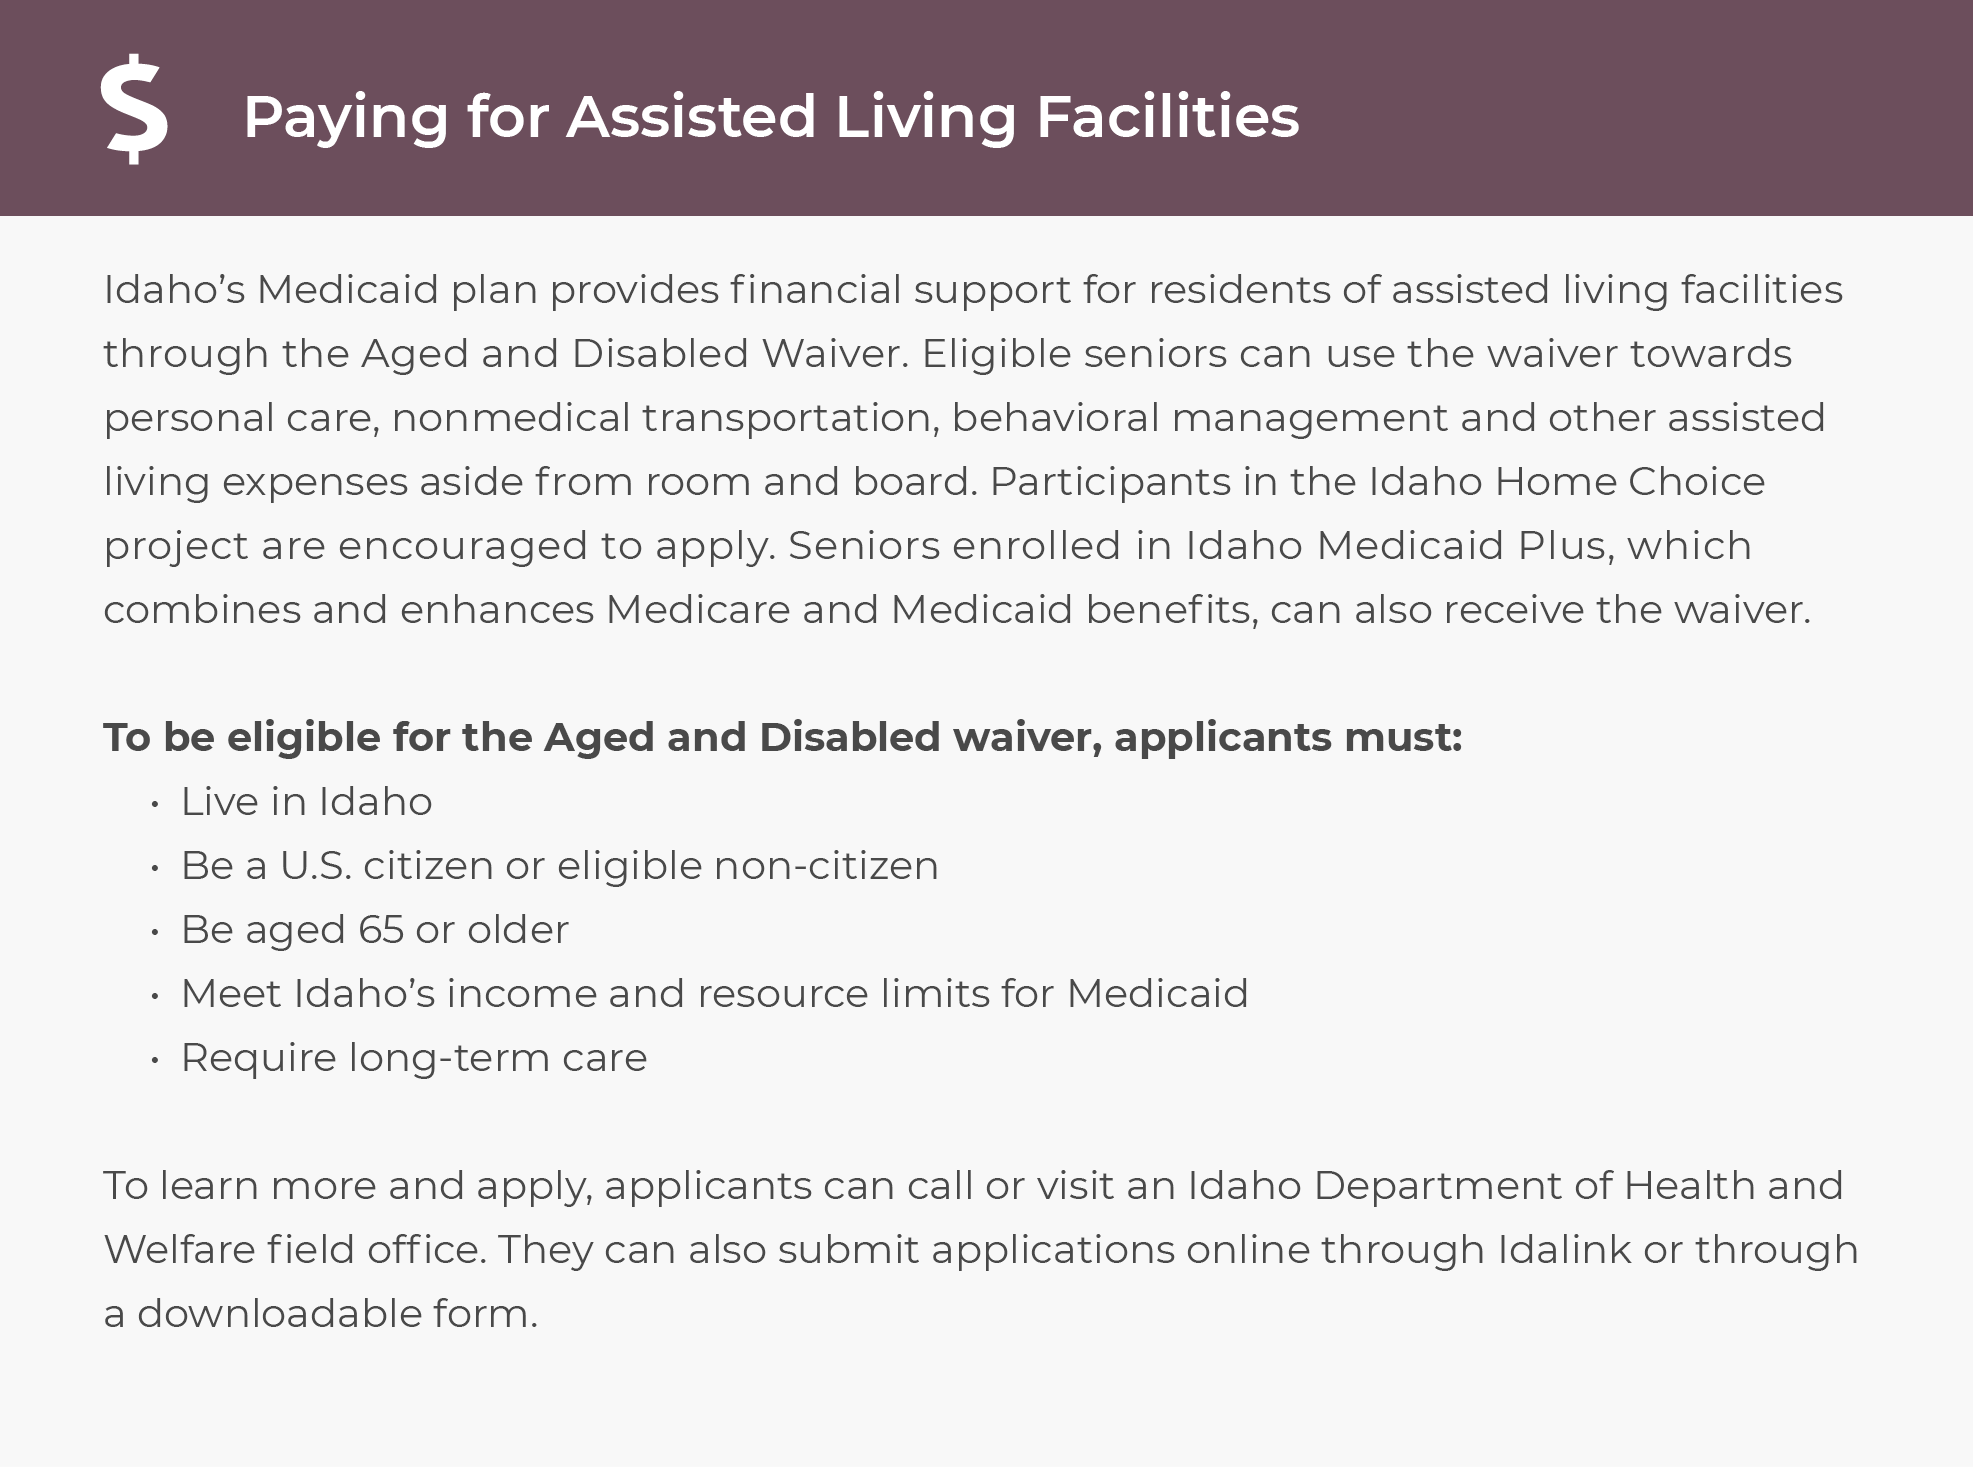 Paying for Assisted Living Facilities in Idaho